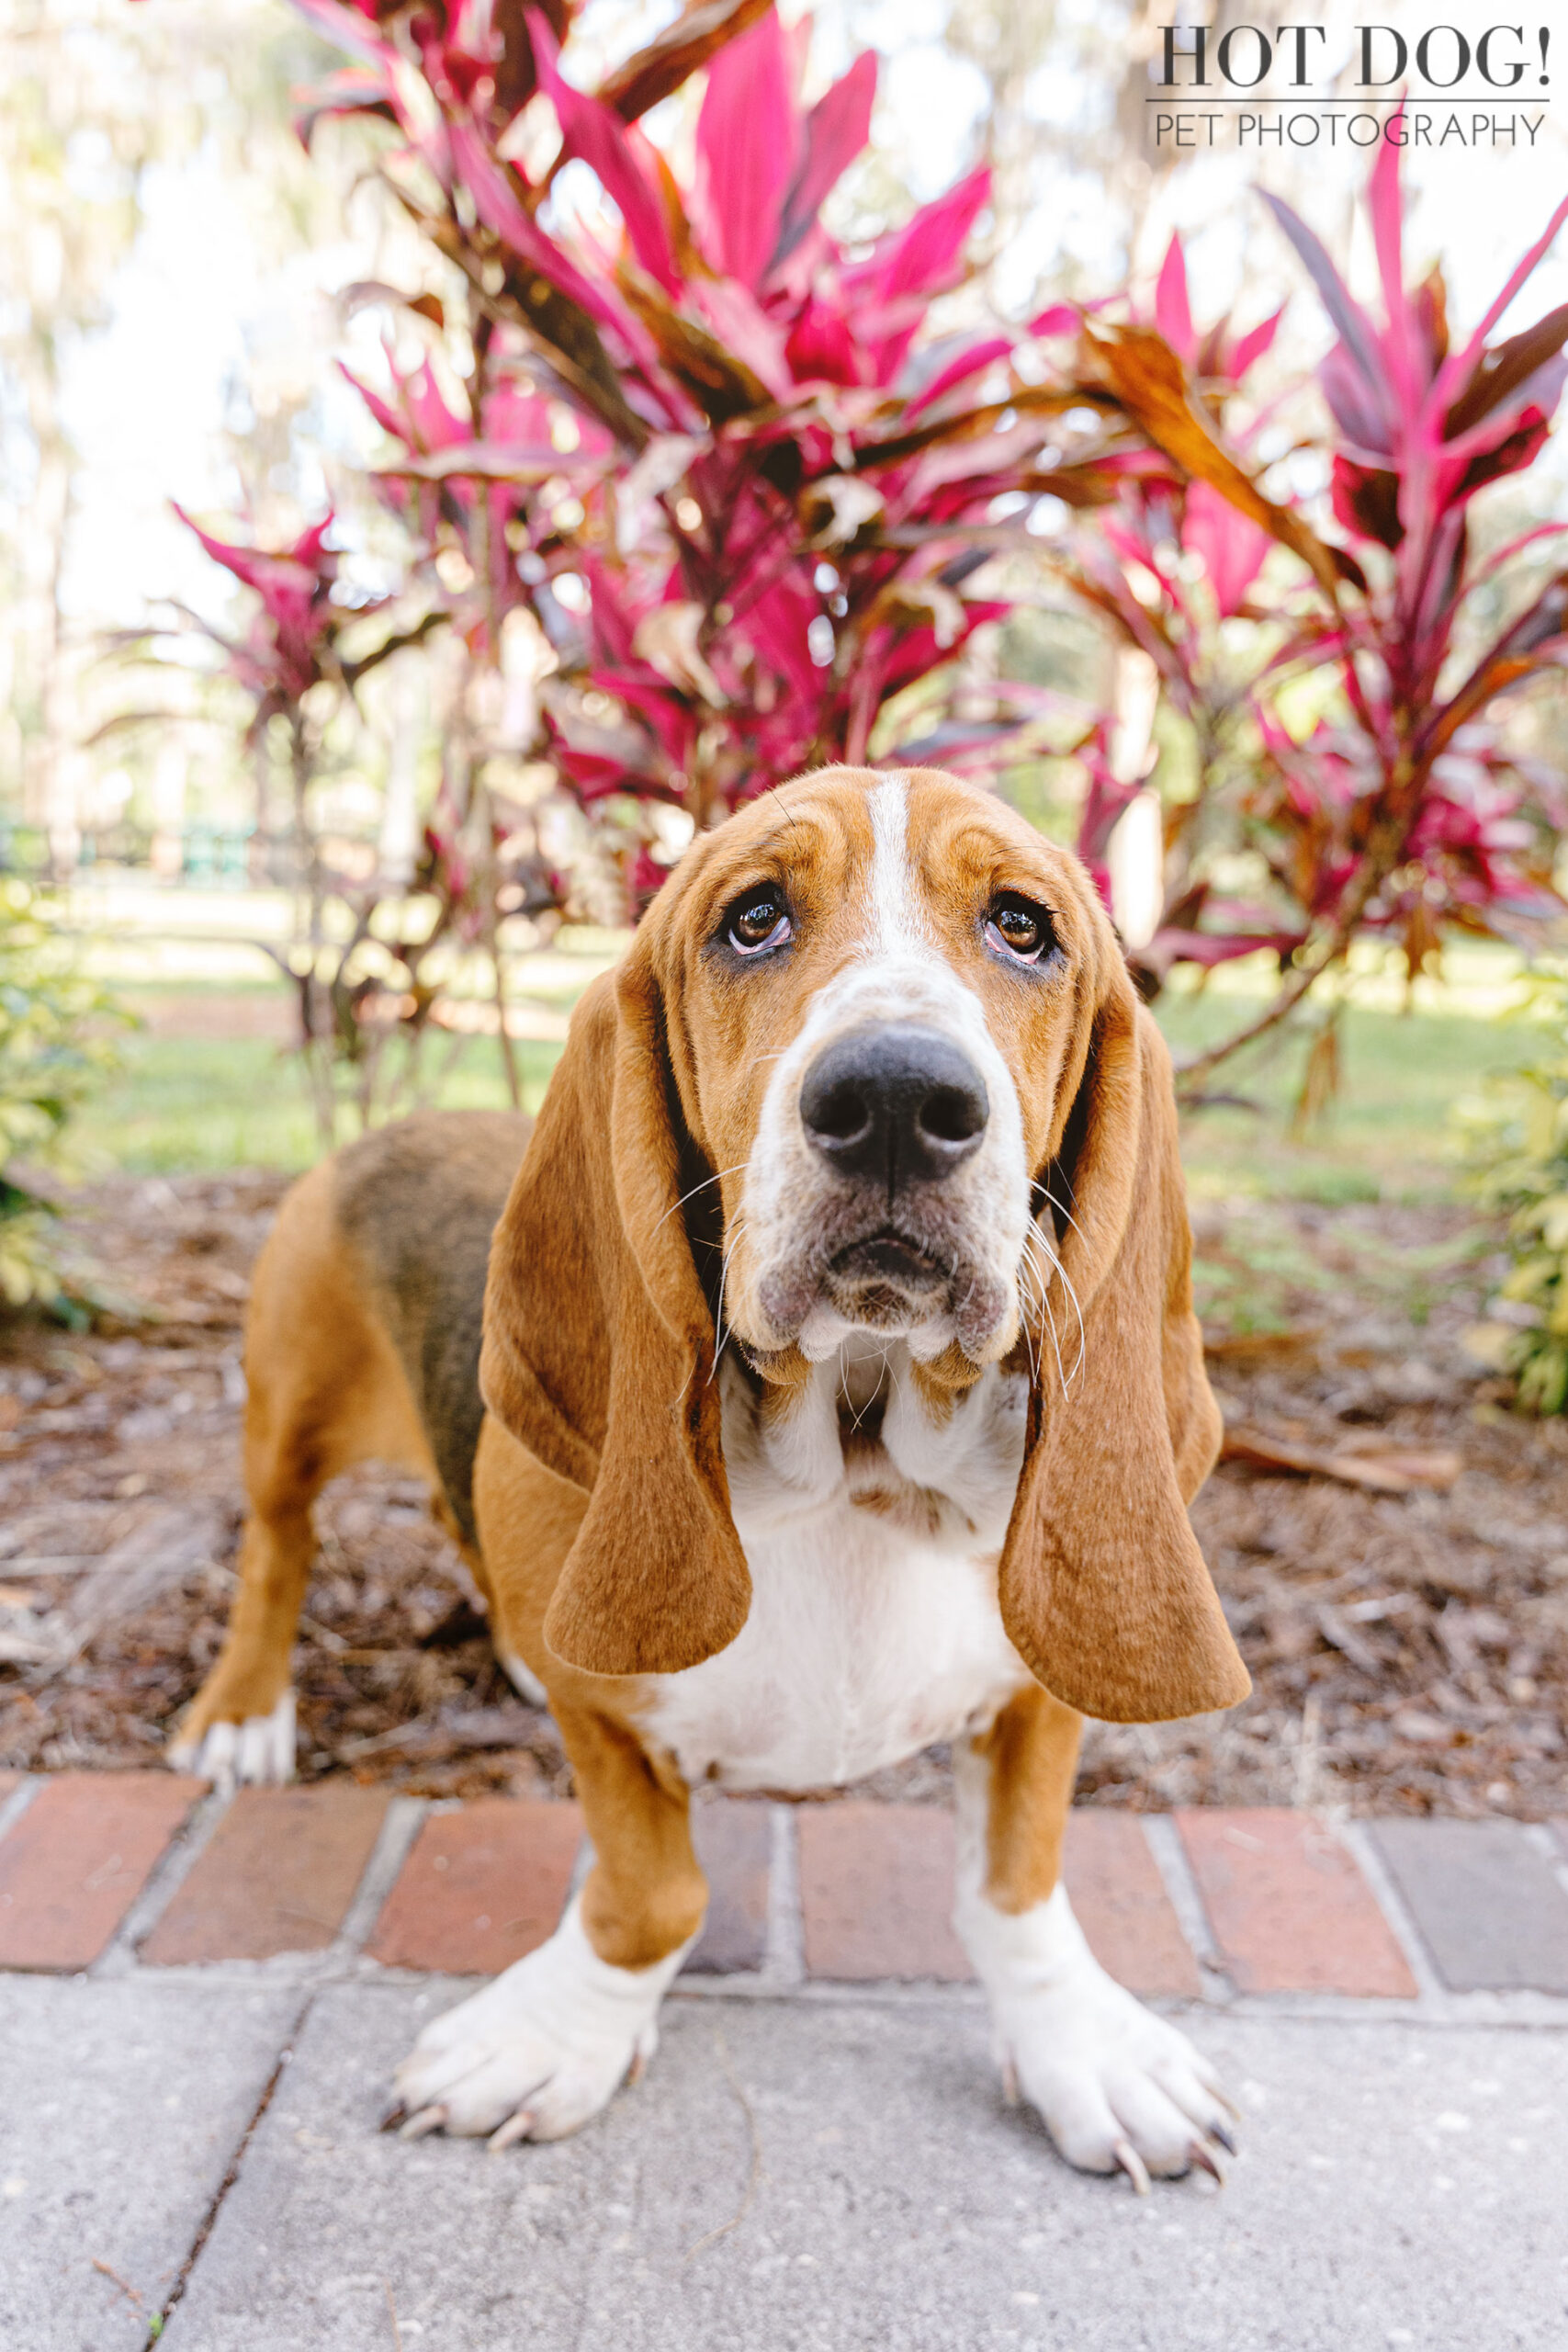 Basset hounds are the stars of a professional pet portrait in Orlando, Florida.